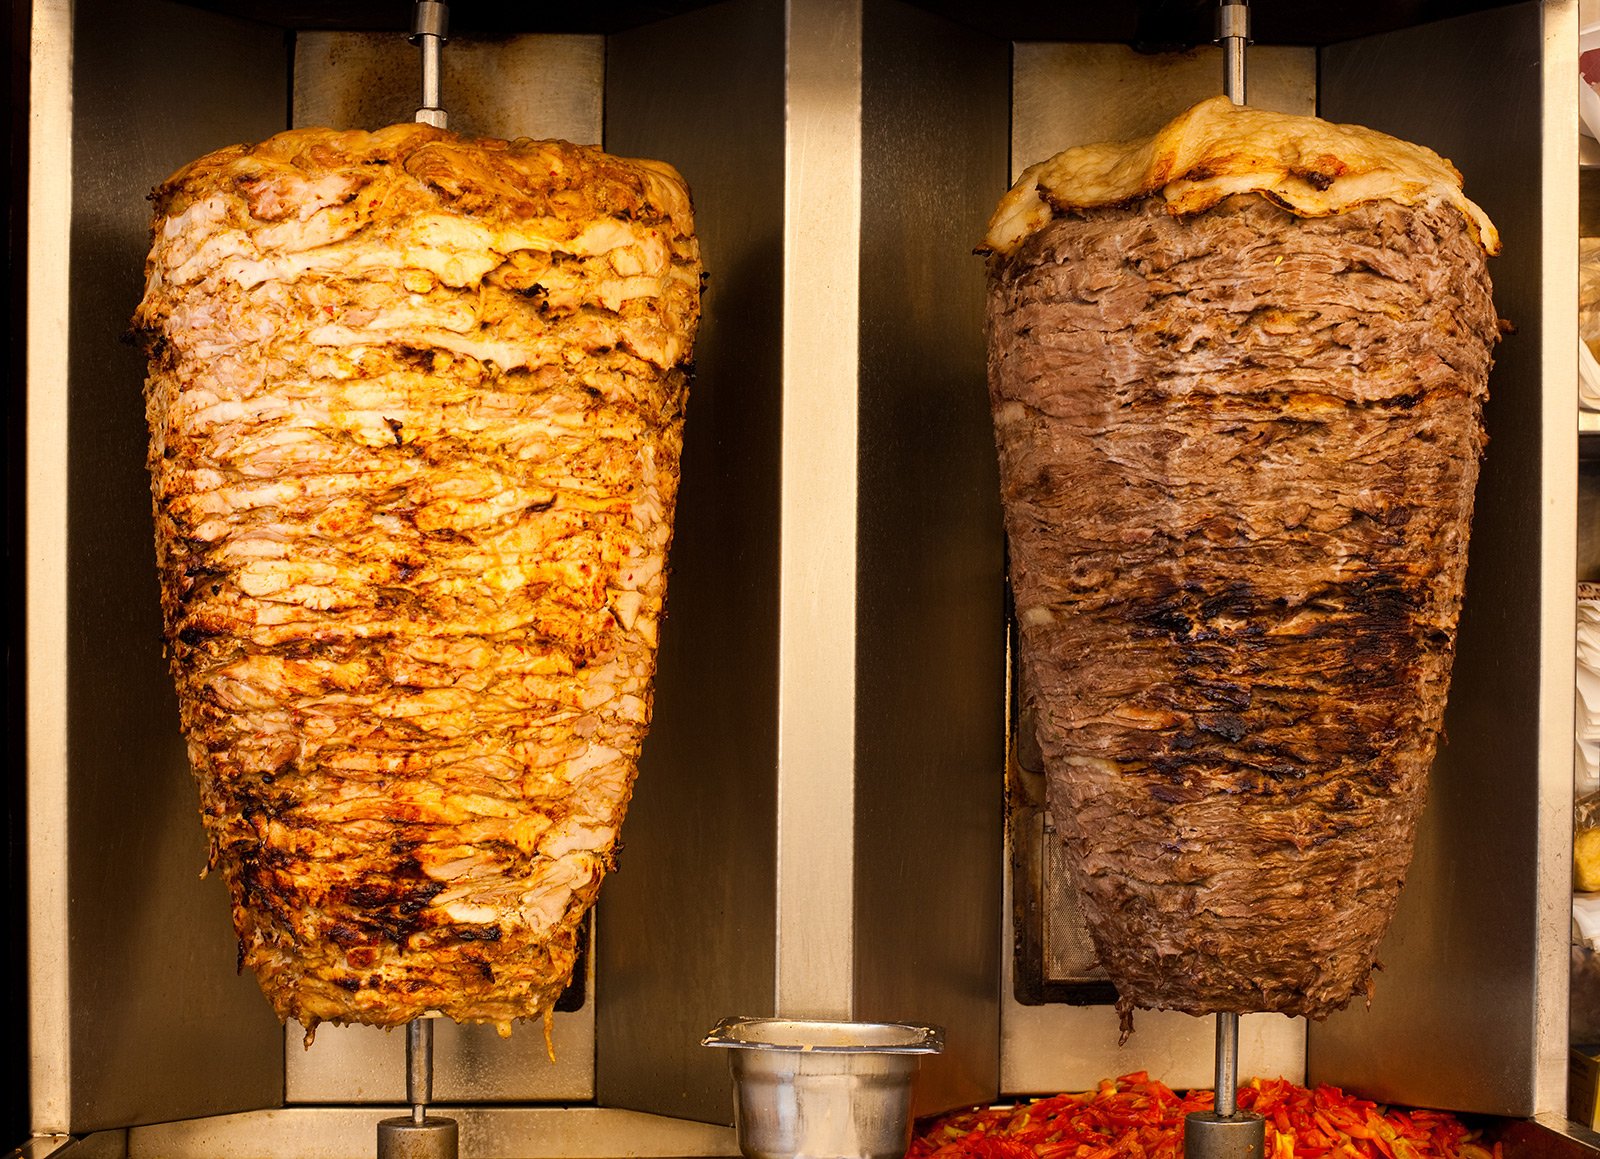 How to try the "real" shawarma in Dubai